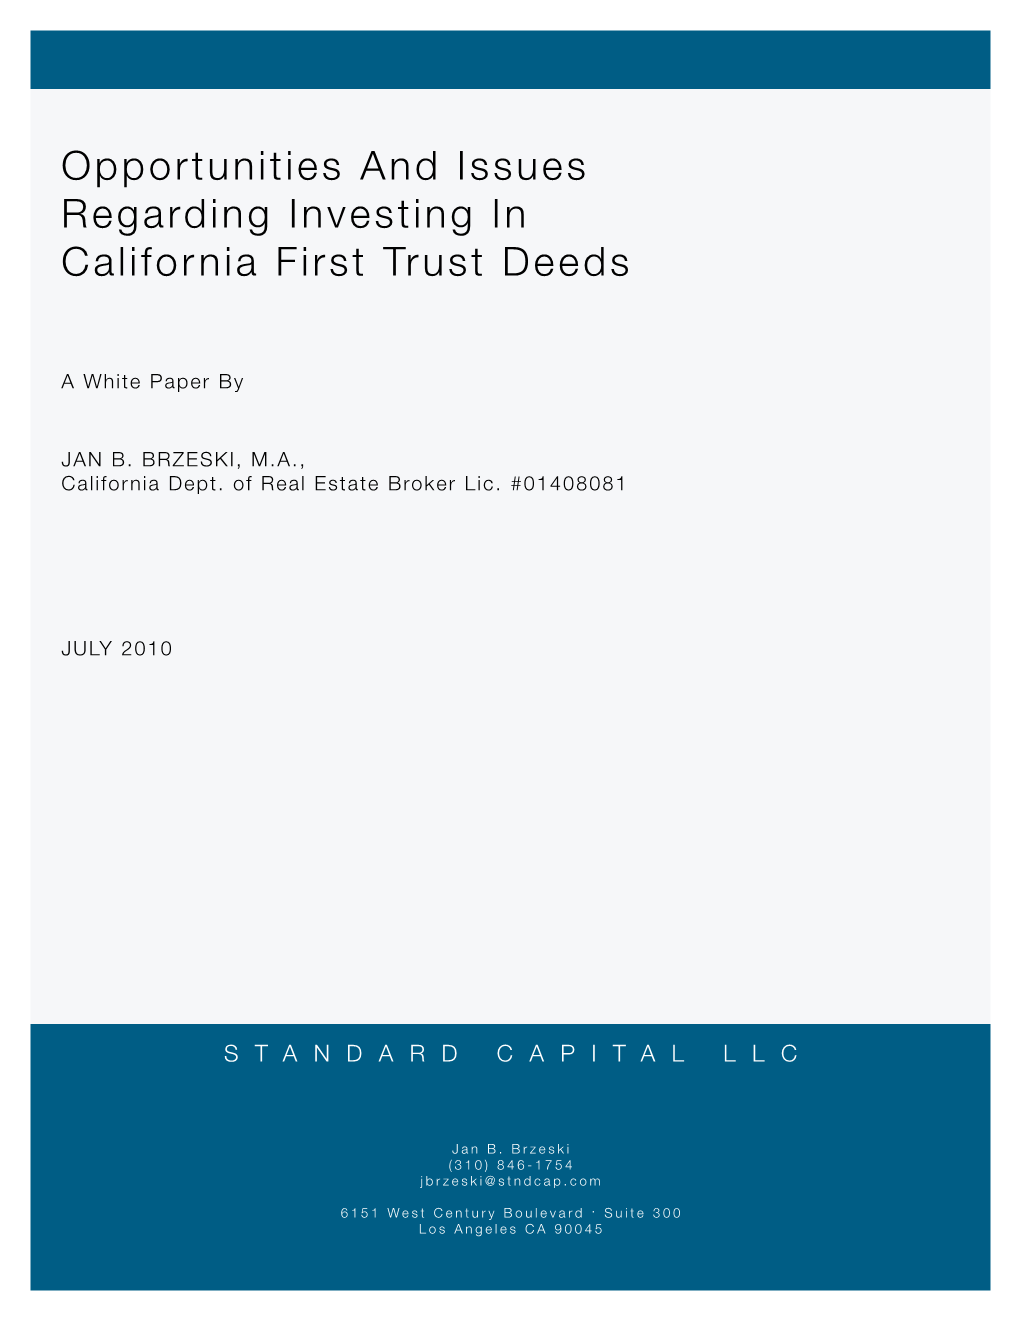 Opportunities and Issues Regarding Investing in California First Trust Deeds